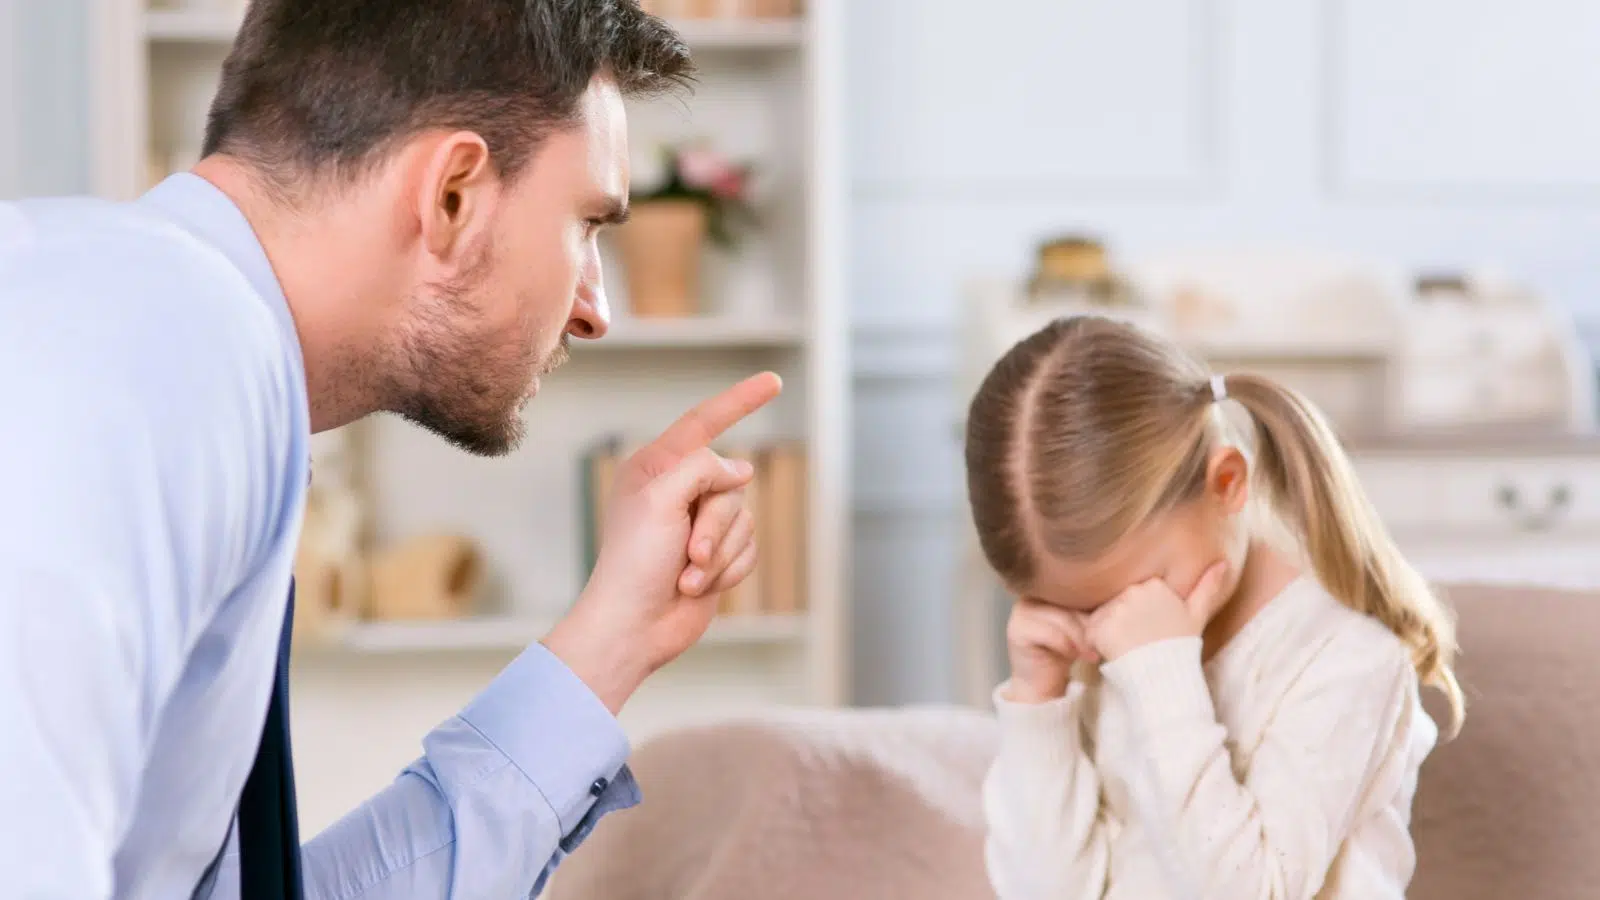 Child yells at parents to get divorced.